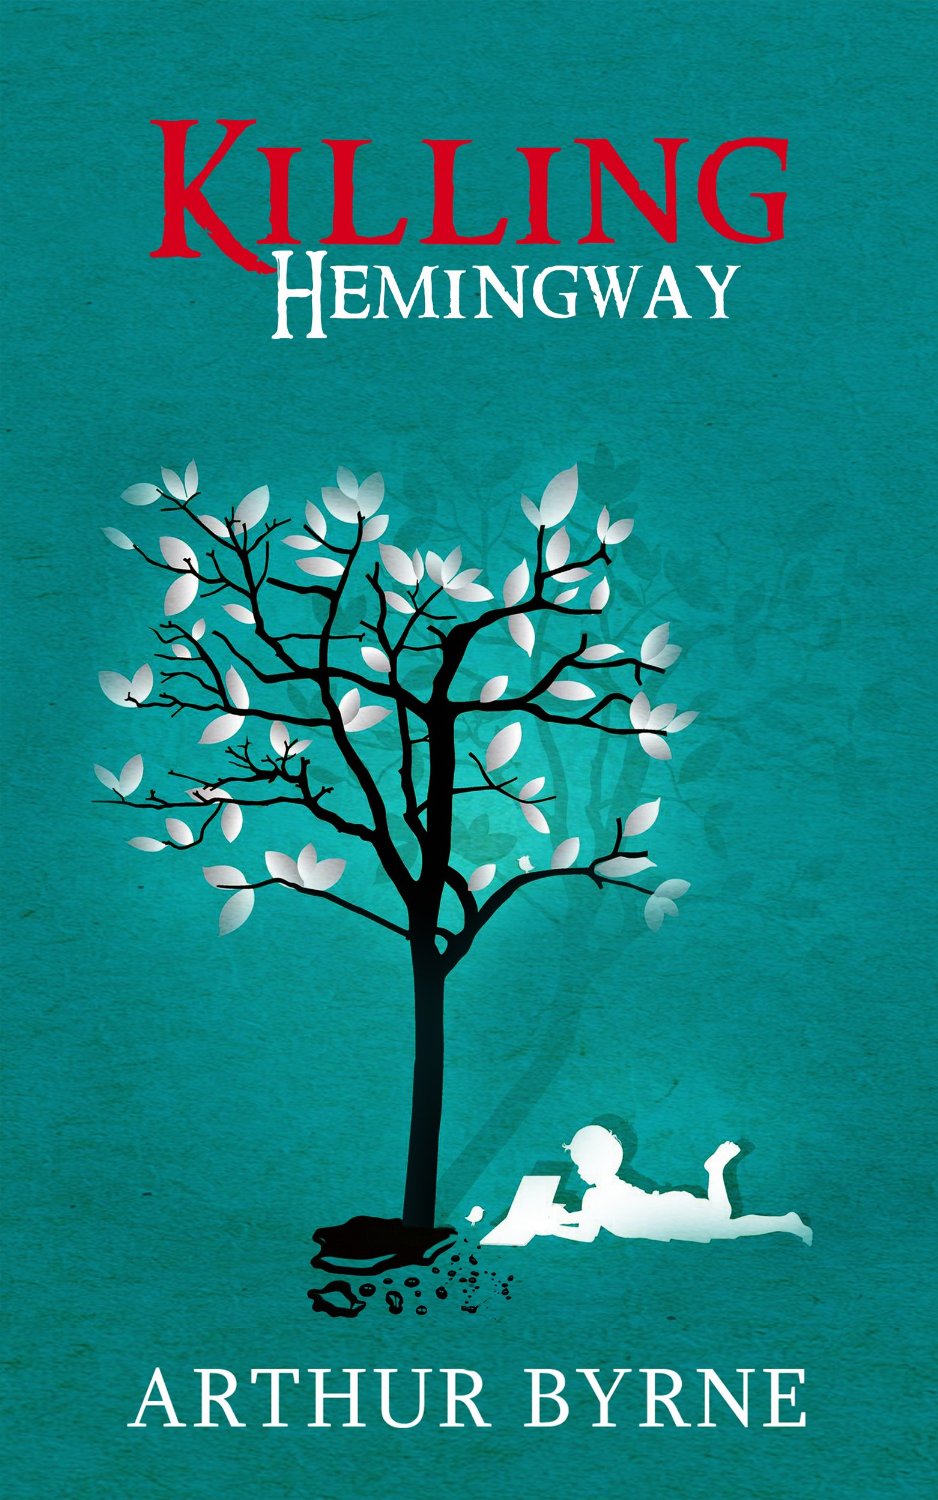 Killing Hemingway: (A coming-of-age novel about life, decisions, love, and genius.) by Arthur Byrne